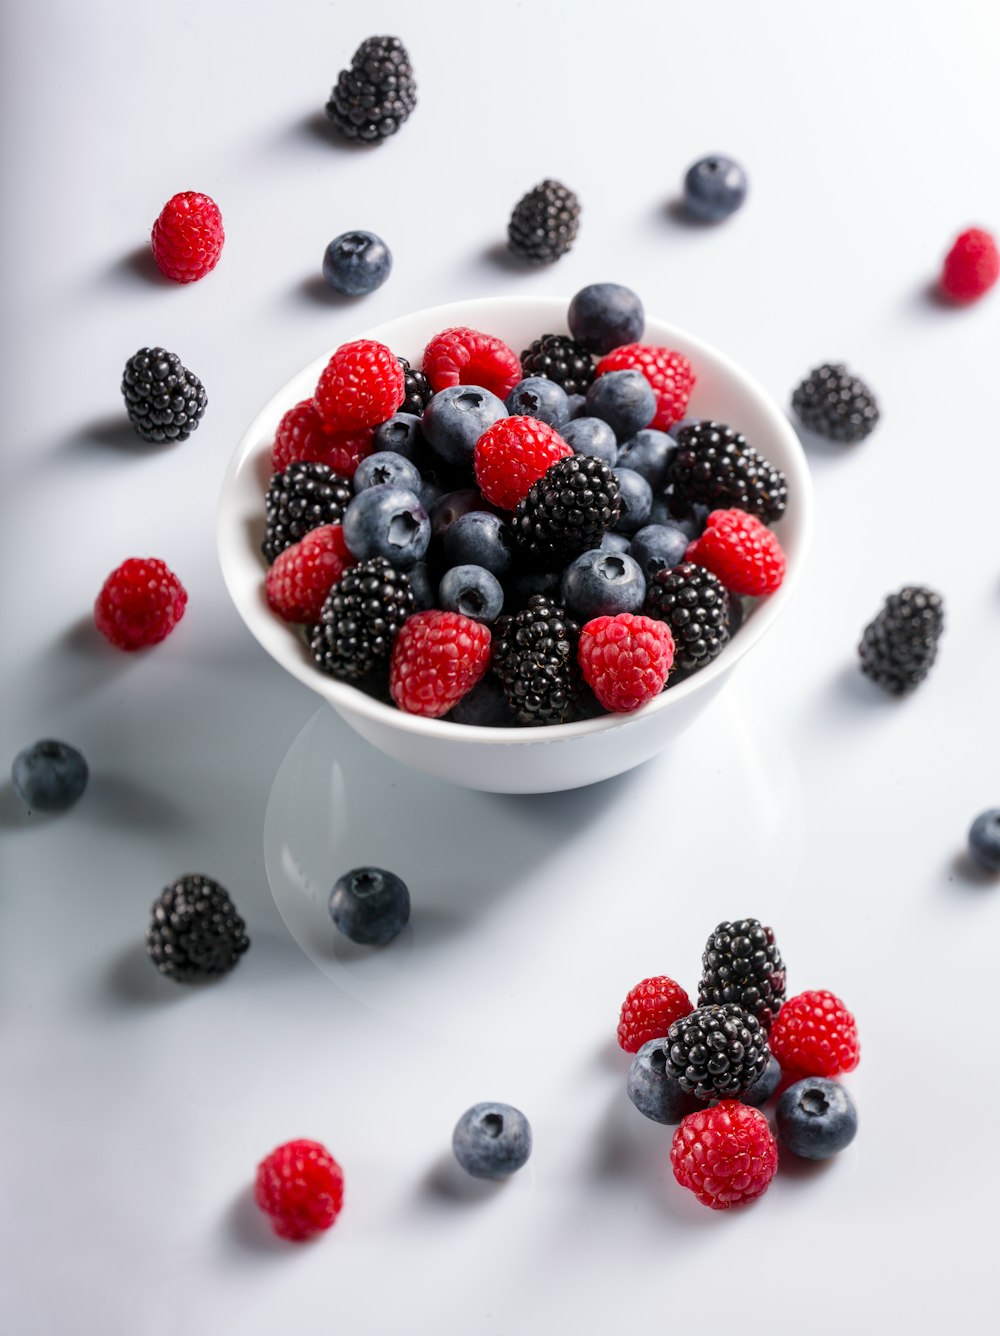 red and black raspberries on bowl